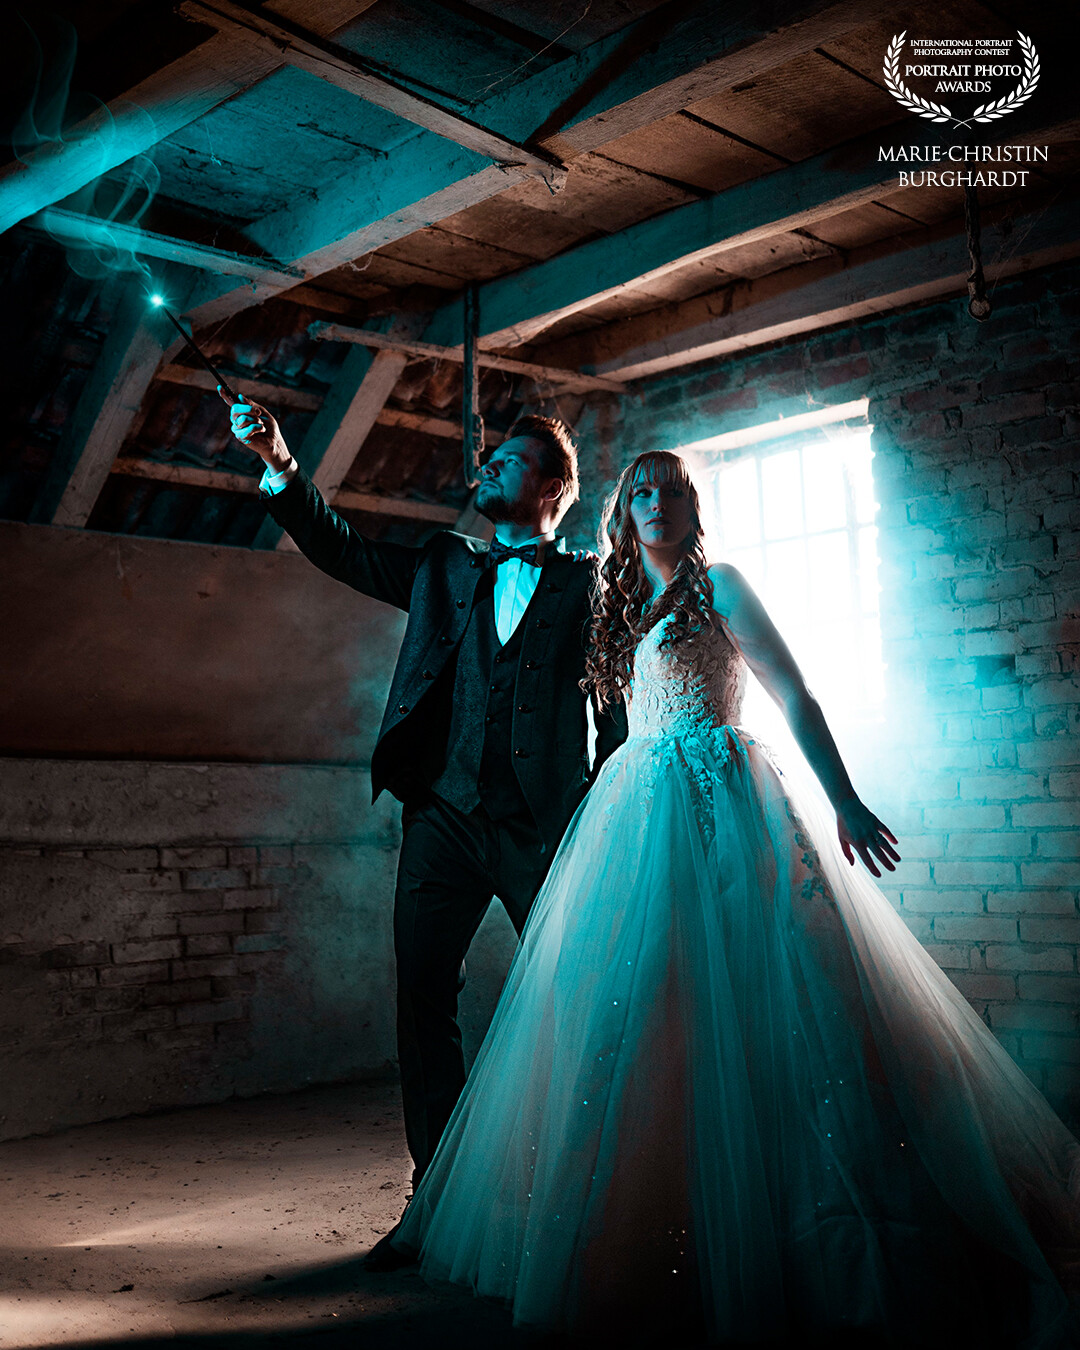 This photo was taken in a fantasy bridal couple shoot. Bride and groom are big fantasy fans and it was a great pleasure for me to do this special shoot with them.